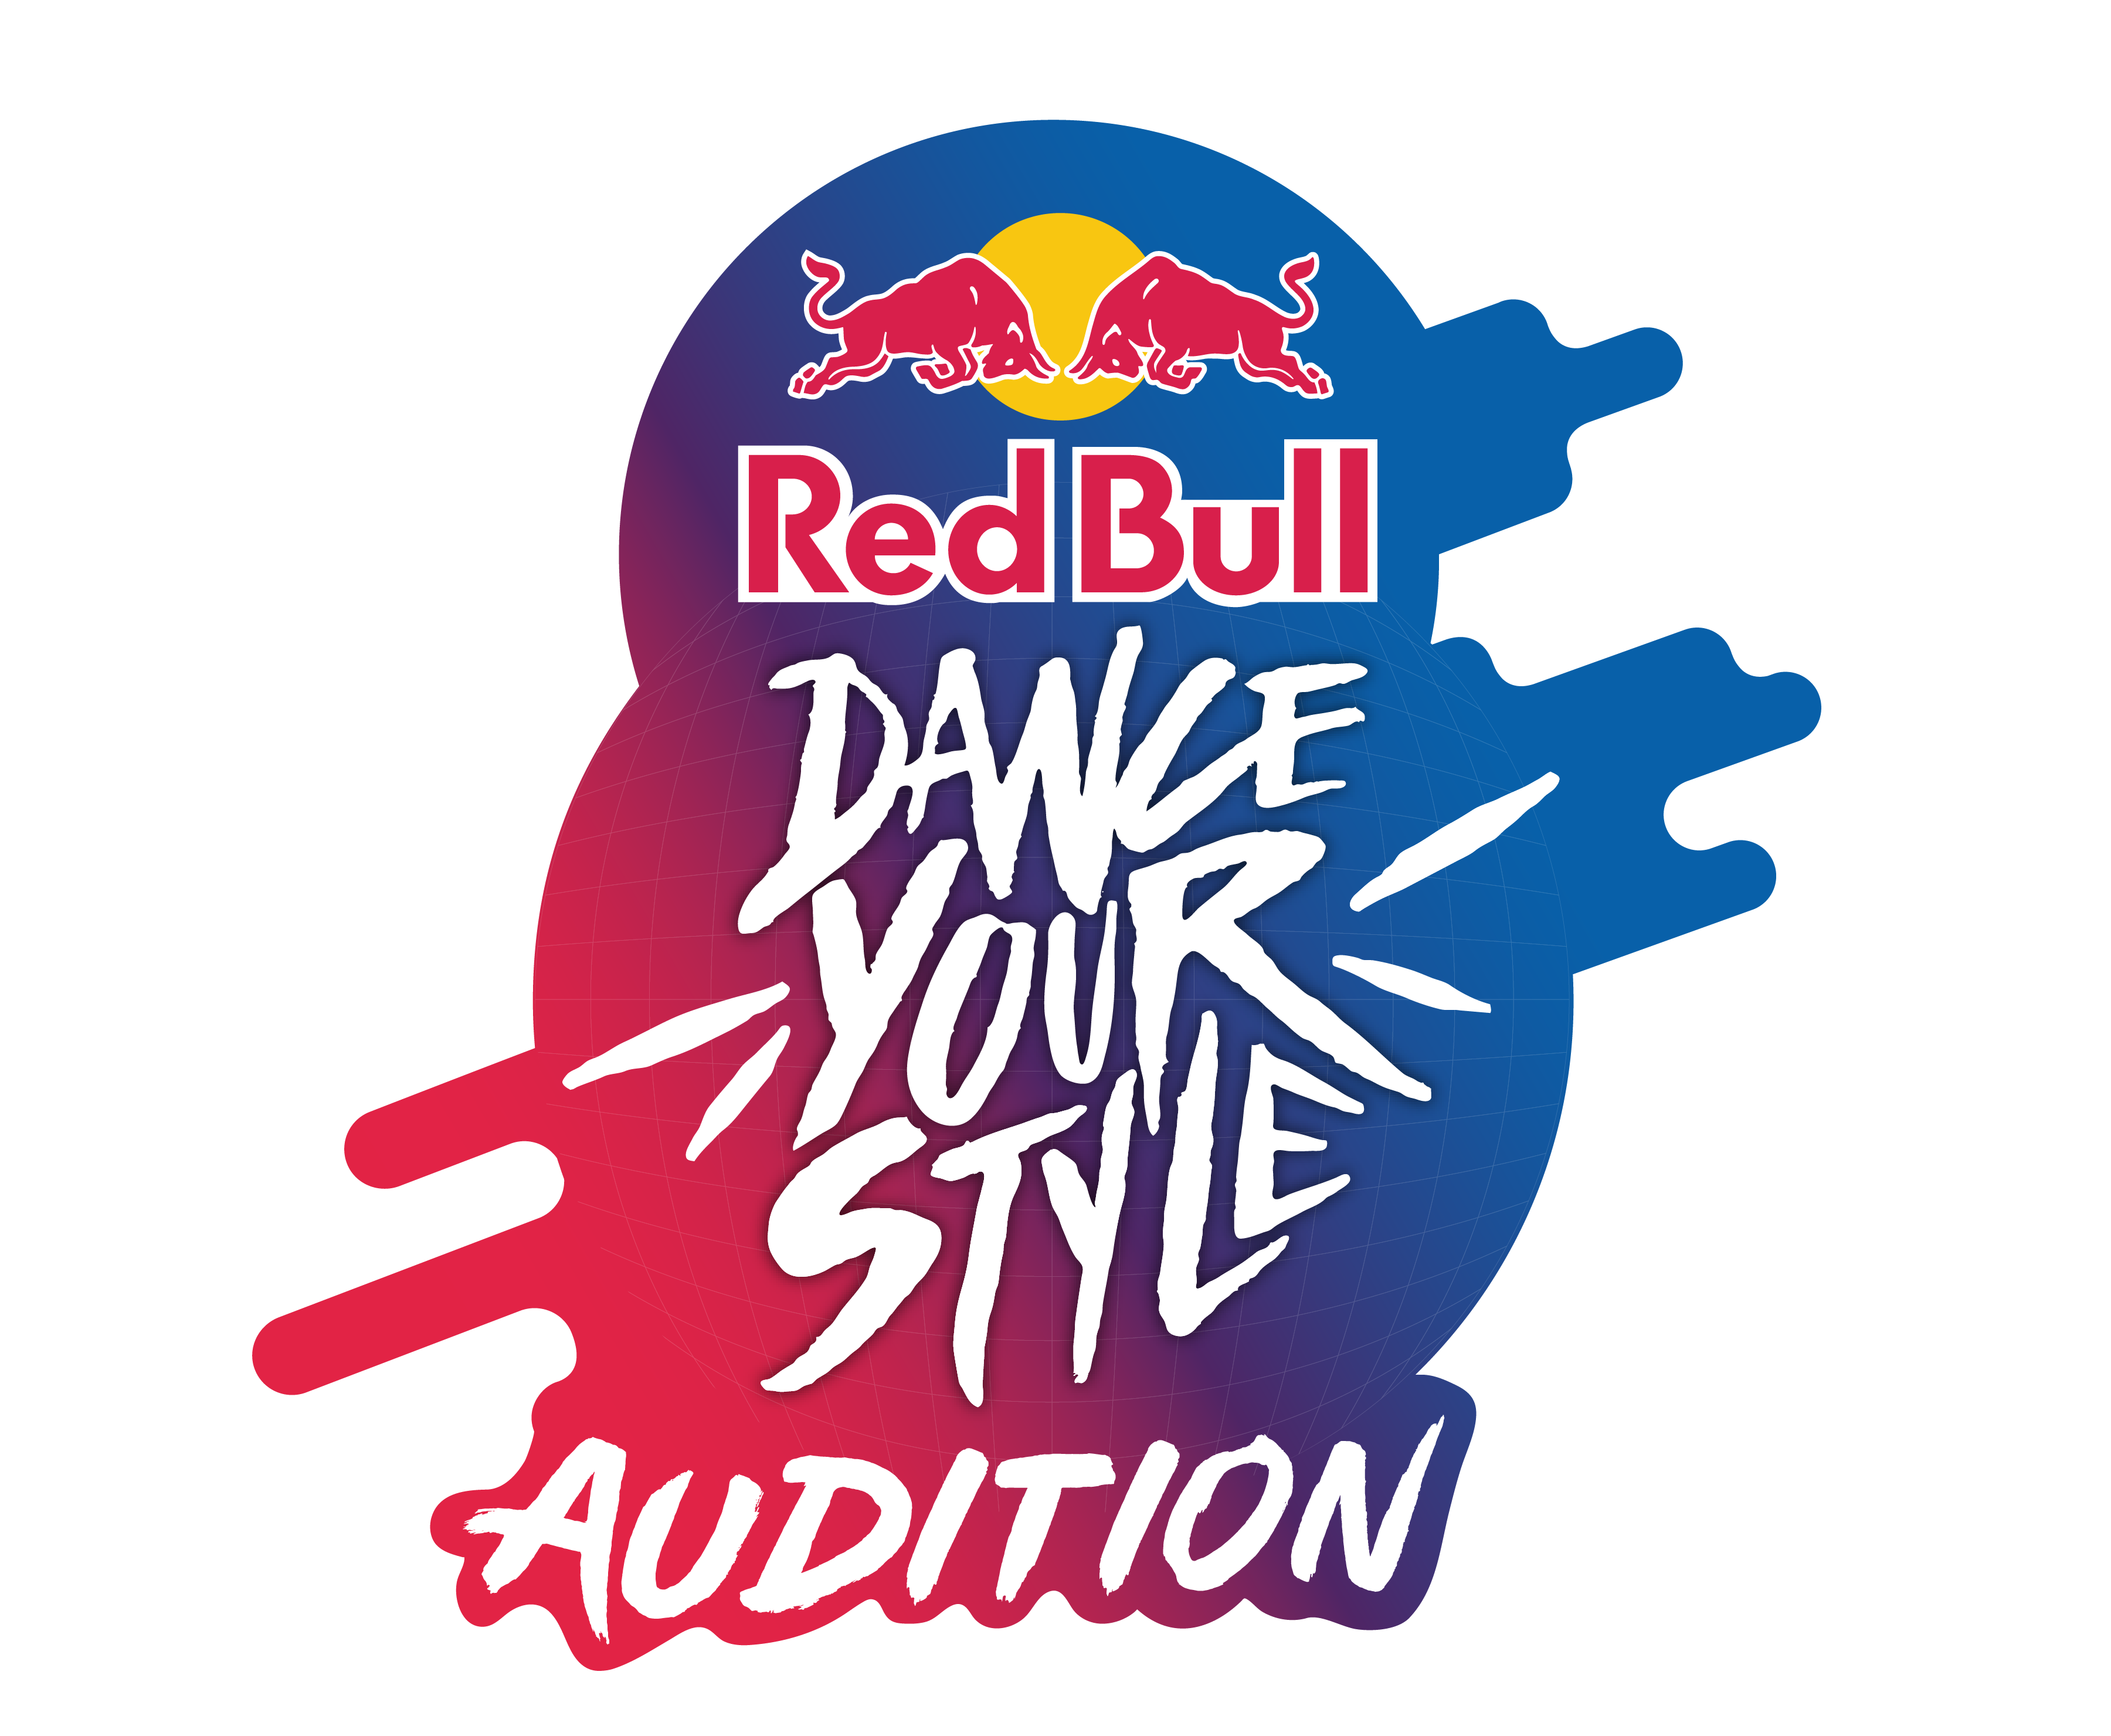 RedBull_Danceyourstyle_Audition